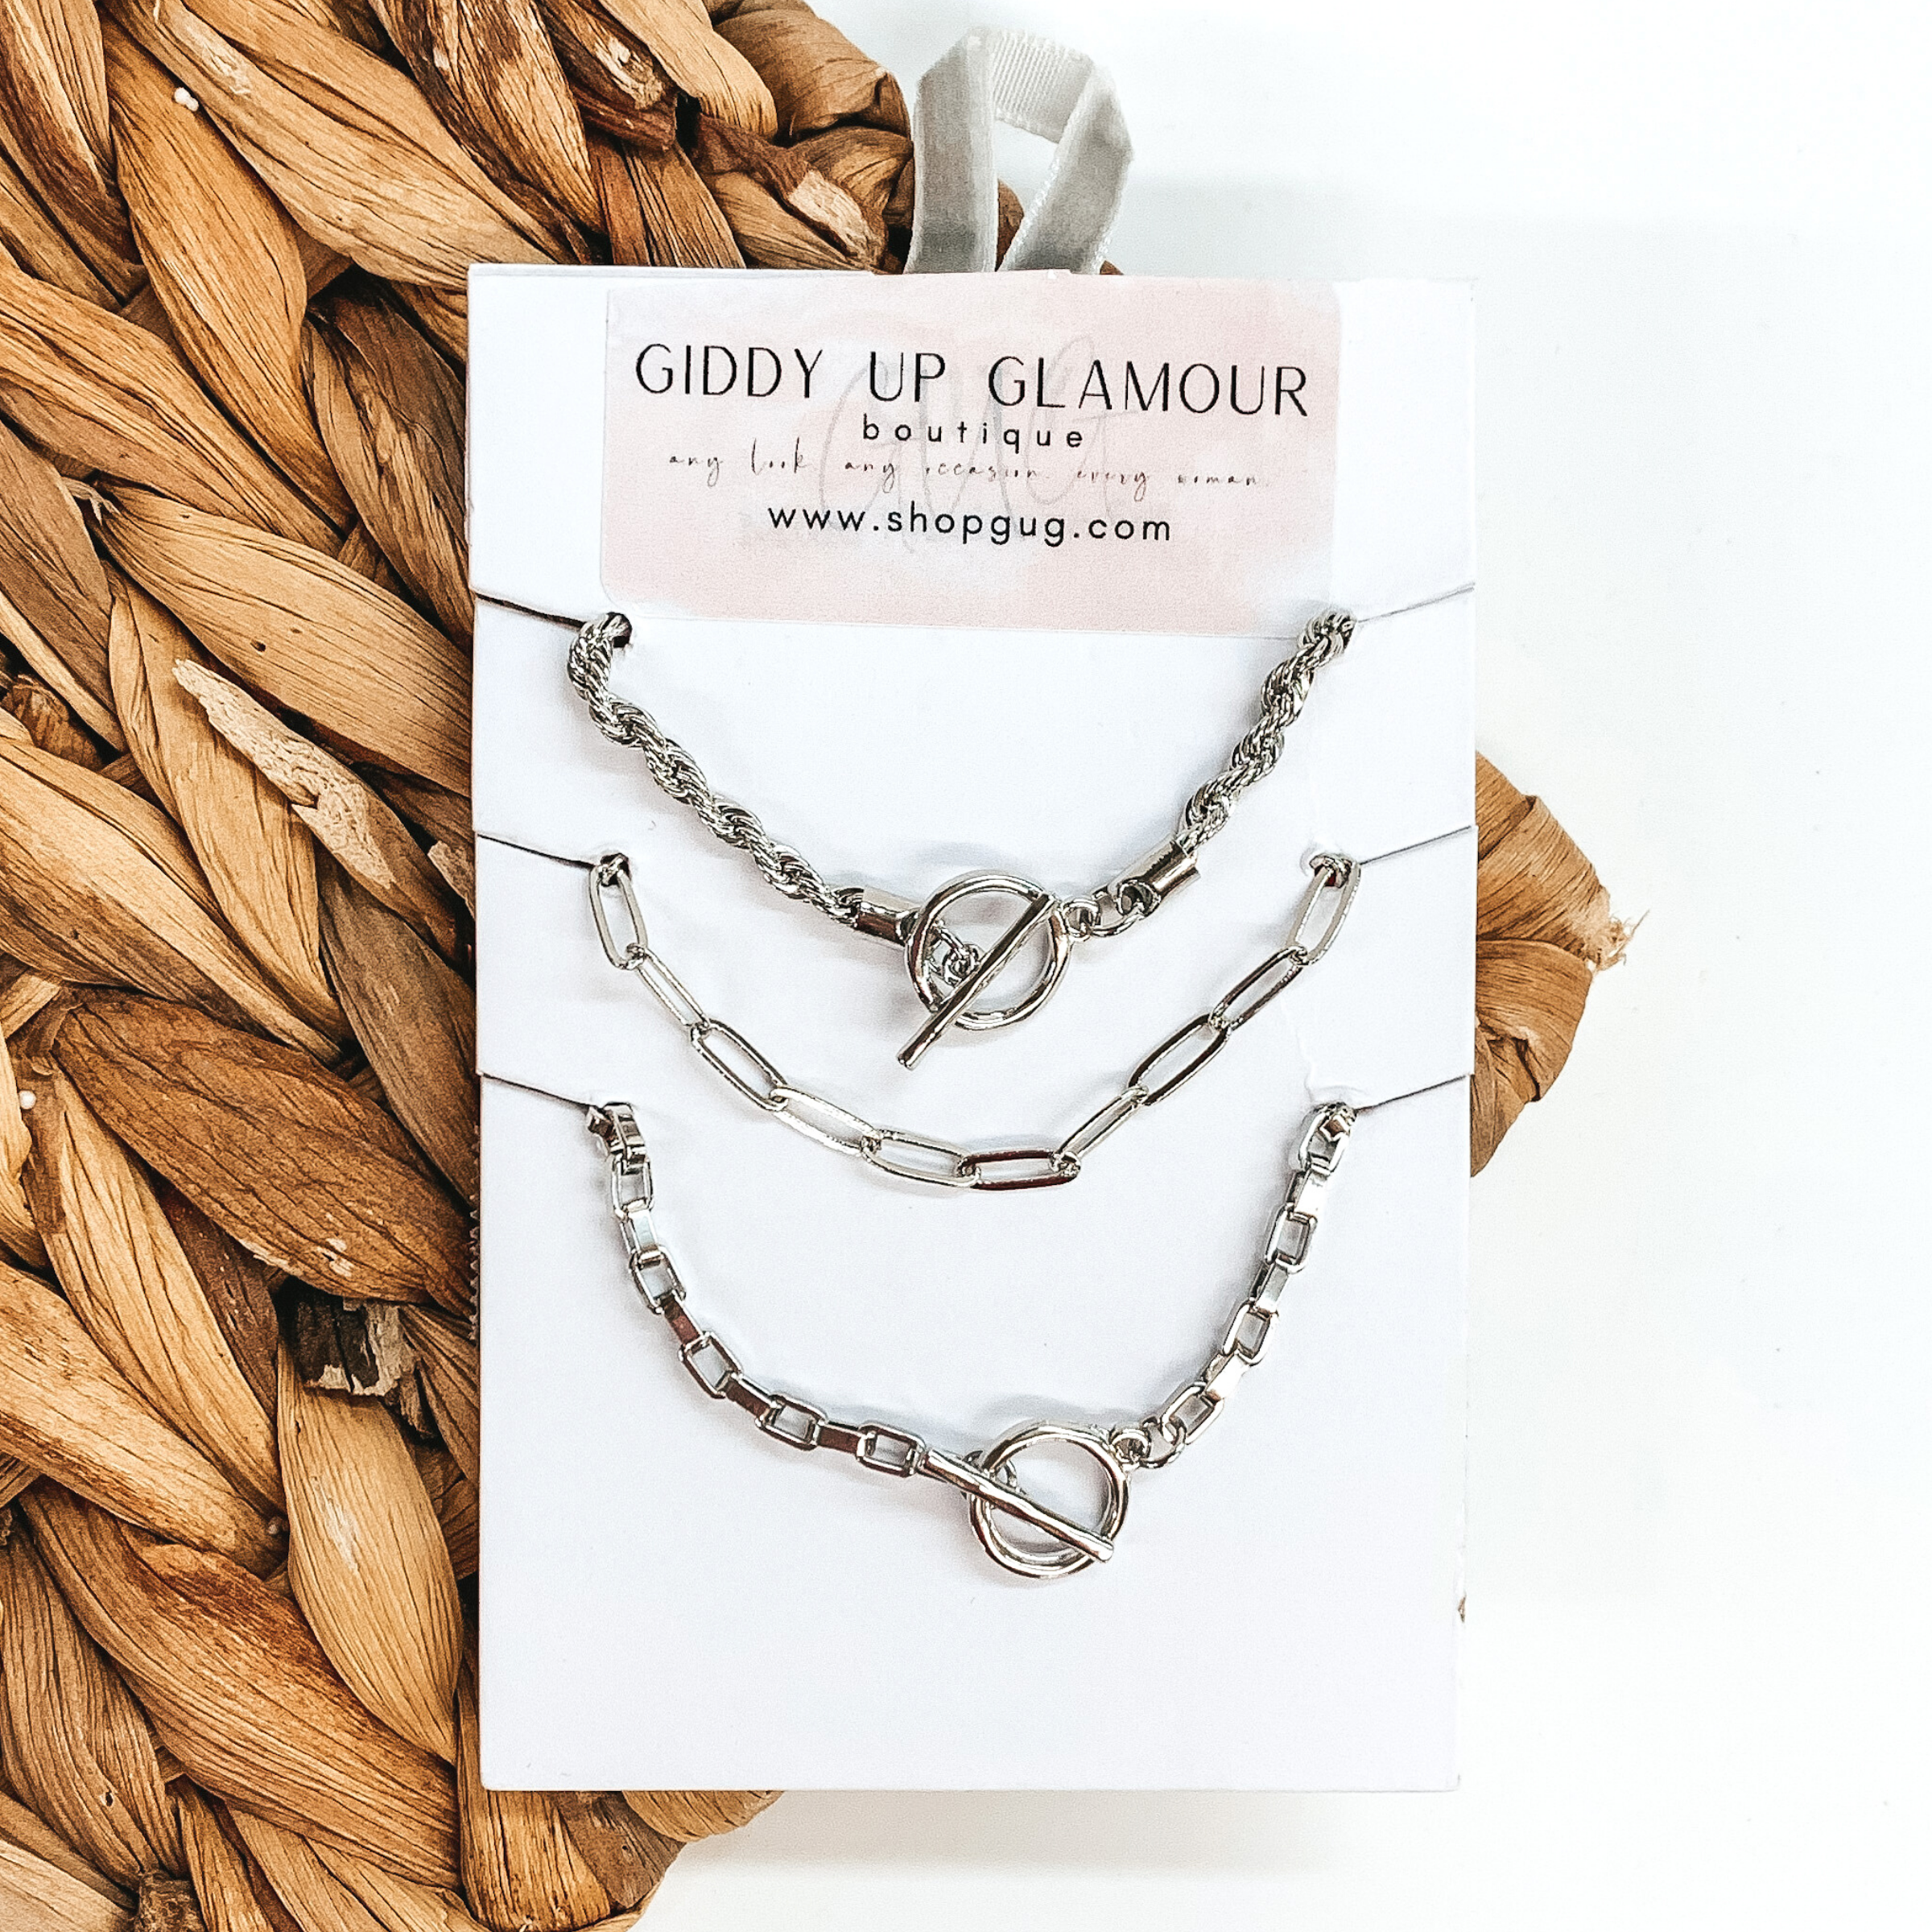 Set of Three | Silver Tone Chain Necklace Set - Giddy Up Glamour Boutique